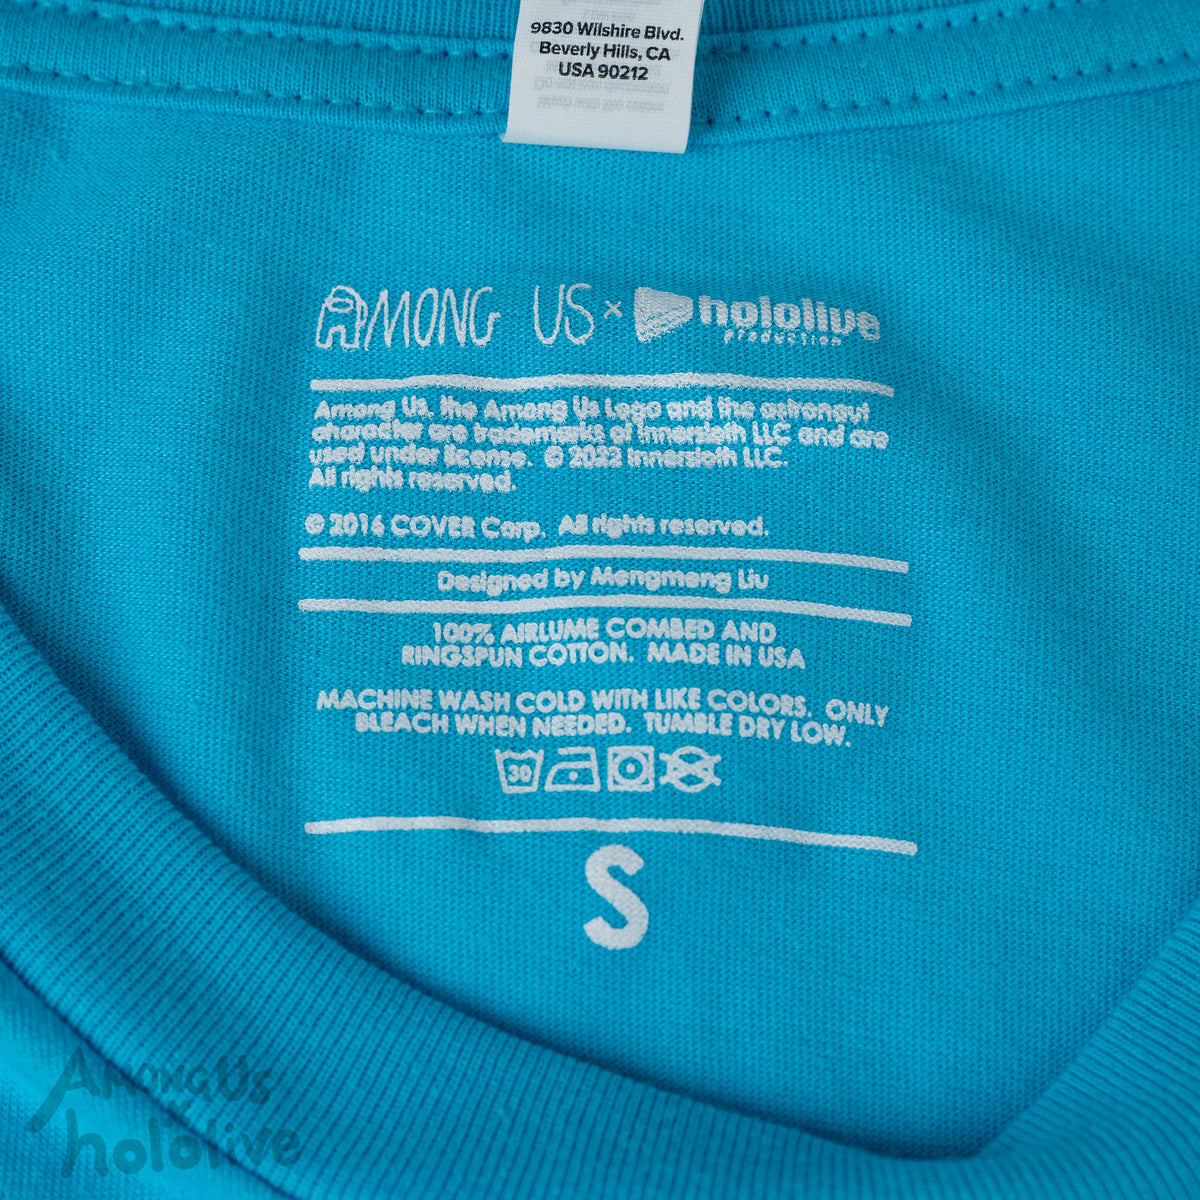 A closeup photo of the t-shirt care information and size, printed directly on the fabric.